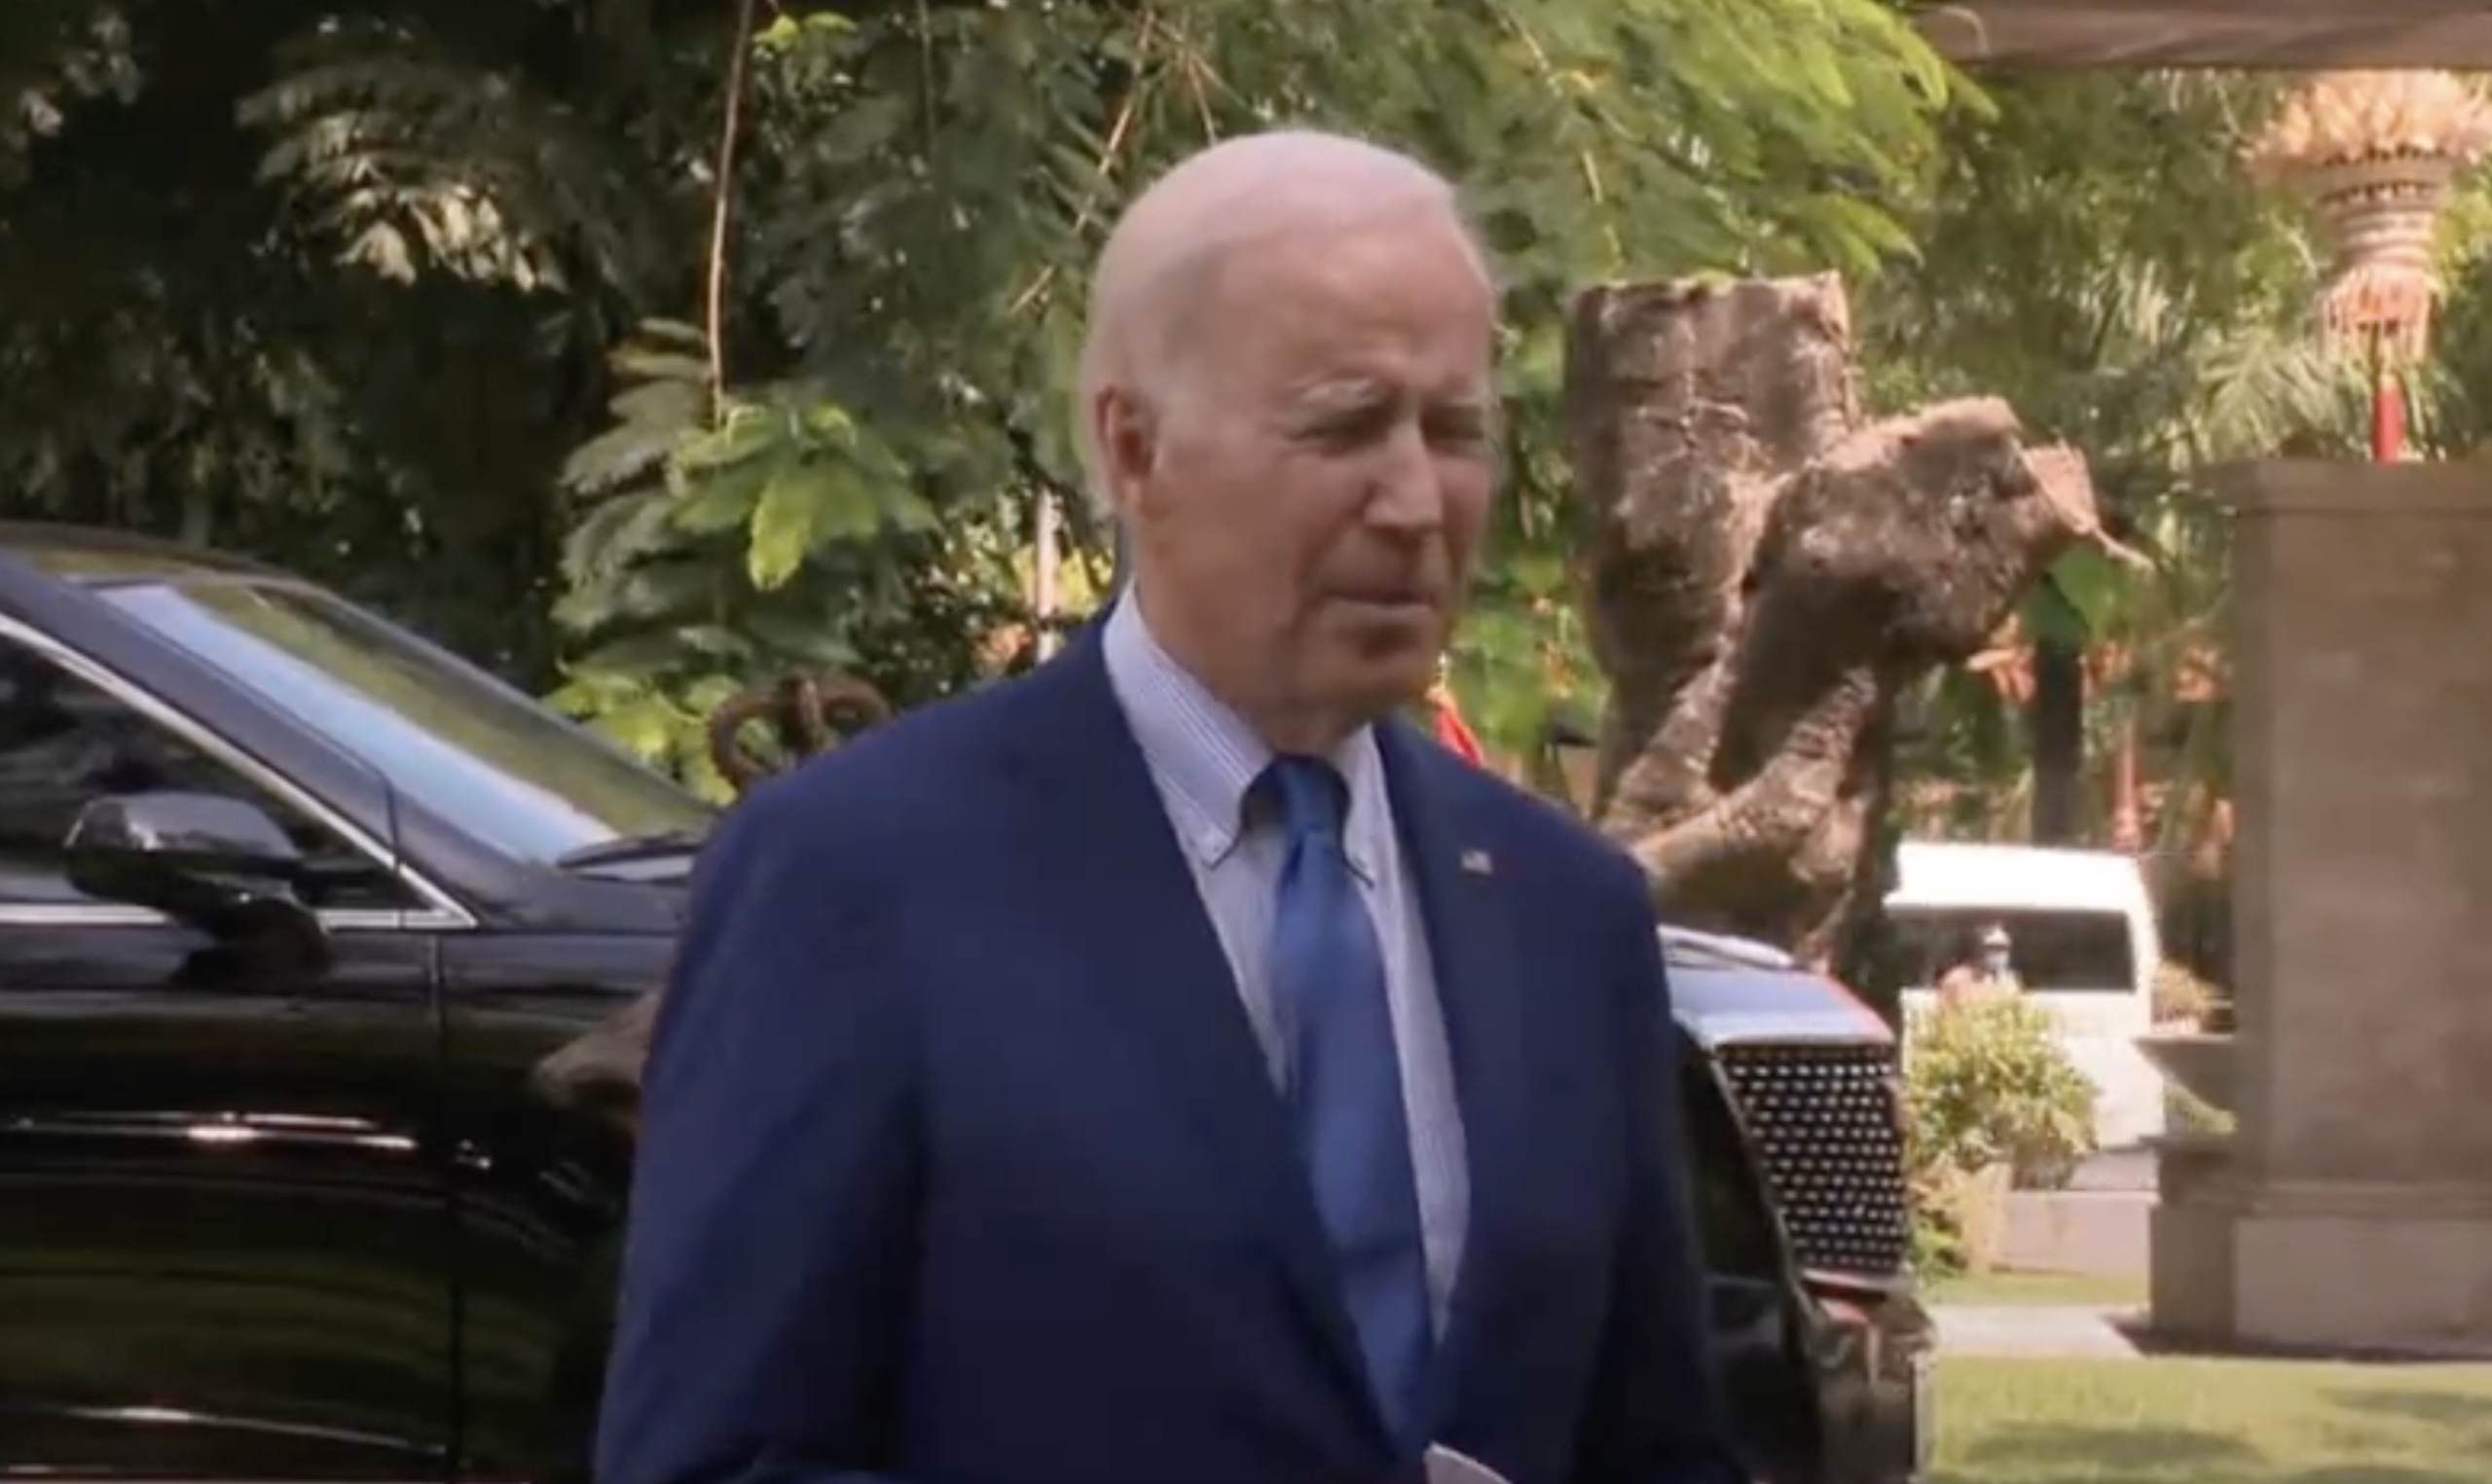 BREAKING: Joe Biden Says “Preliminary” Information Suggests it is “Unlikely” that a Russian Missile was Responsible for Poland Attack